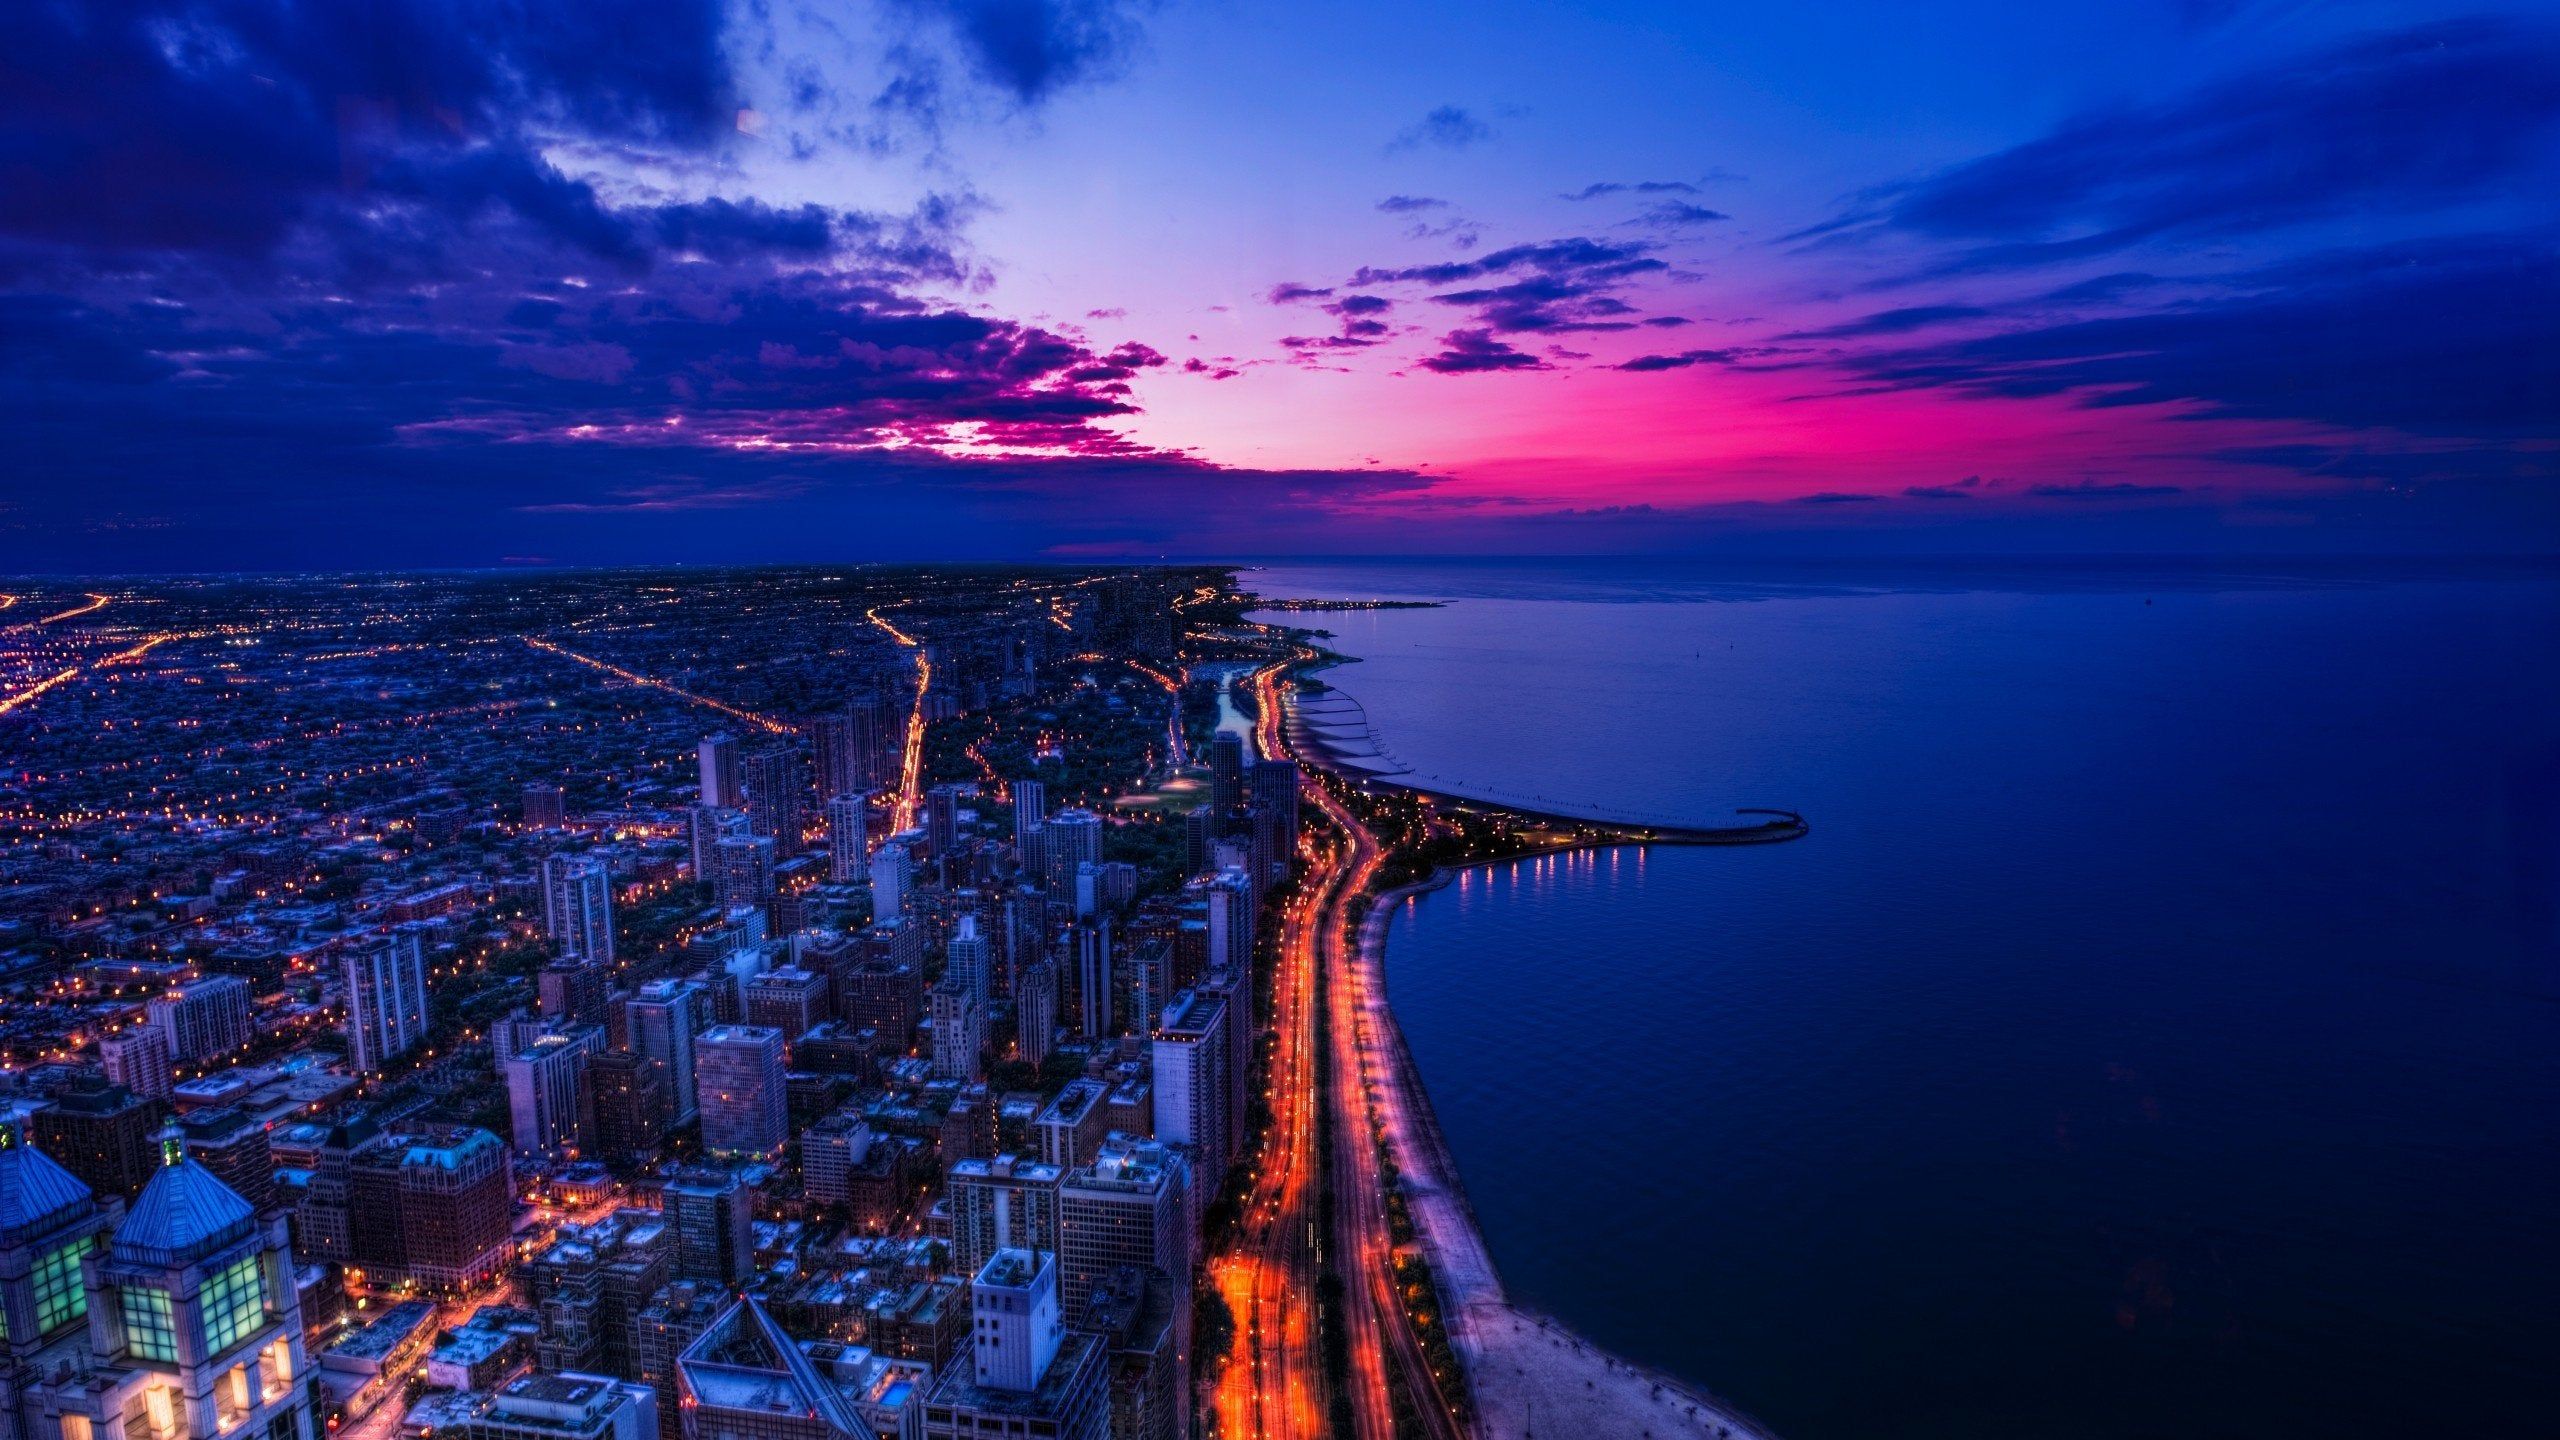 Chicago at sunset. [2560x1440]